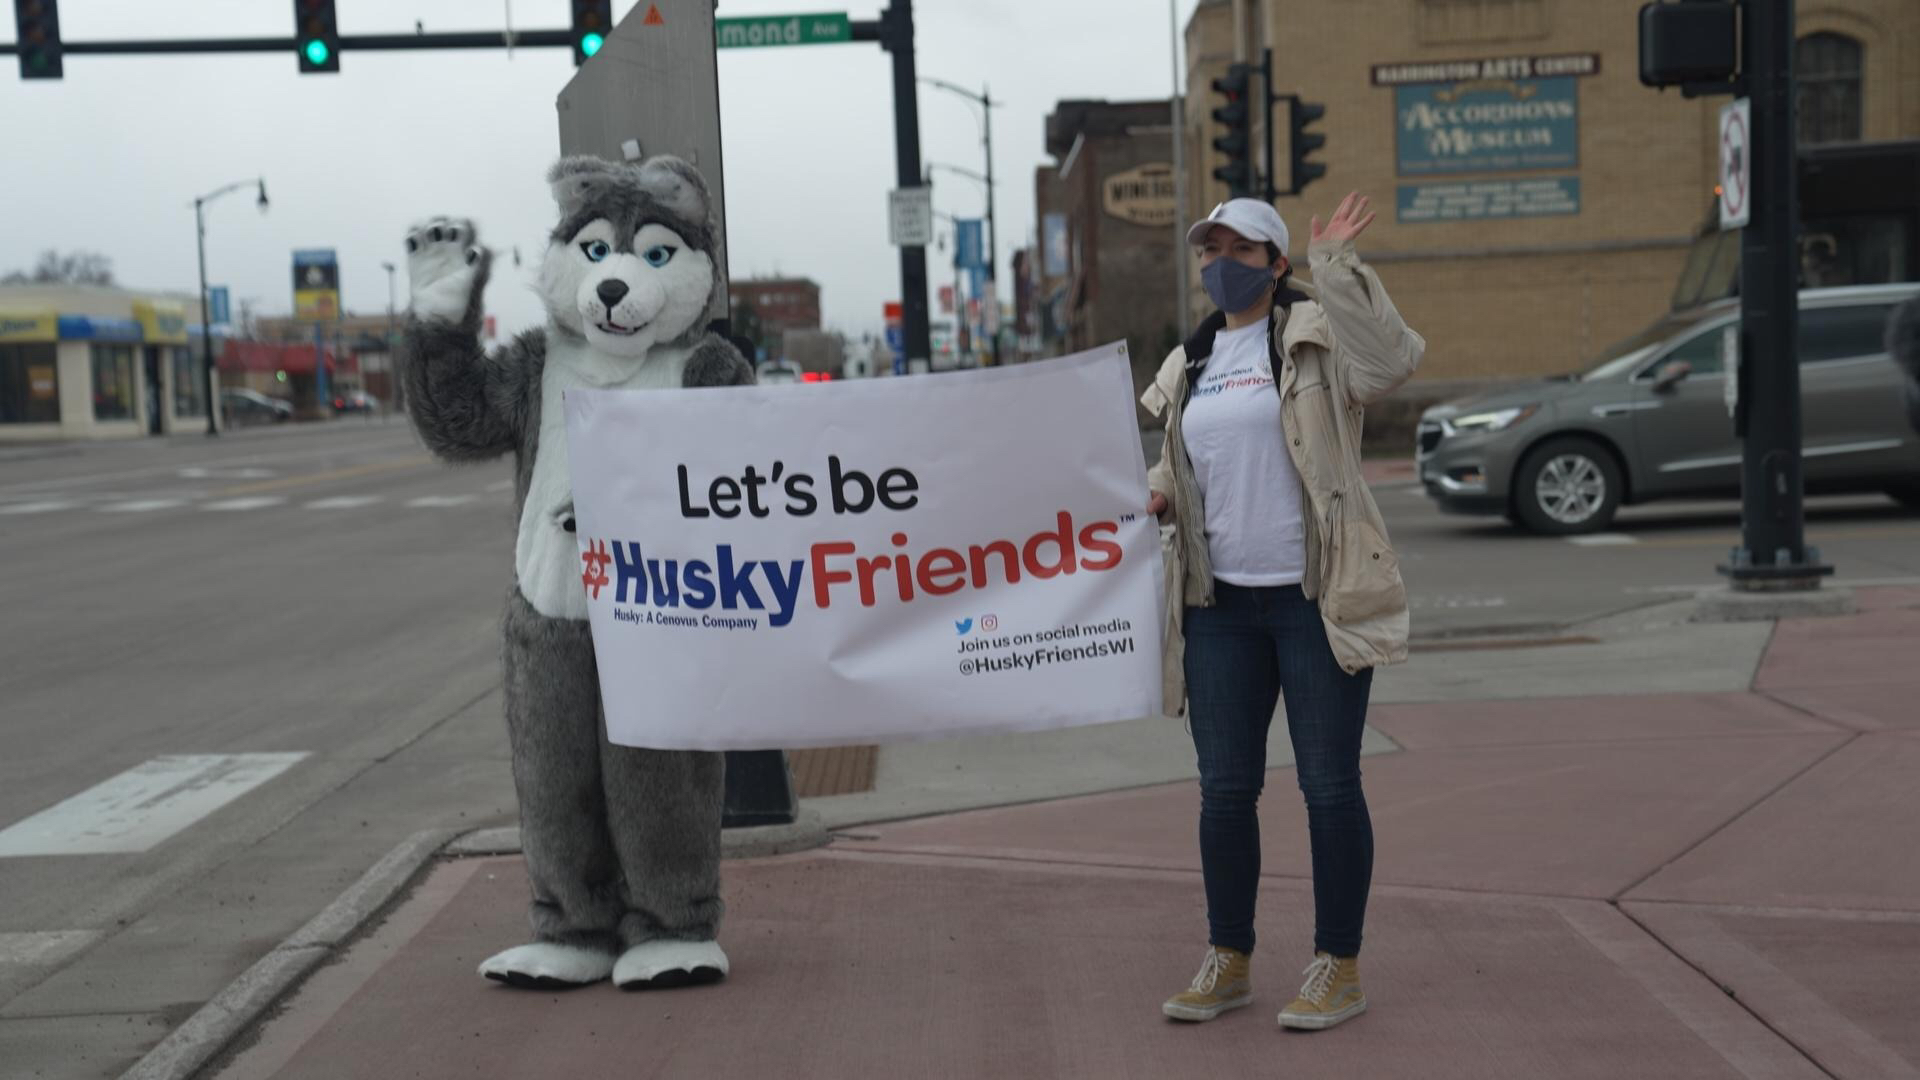 Group targets Husky Energy in public safety initiative hoax on anniversary of Husky refinery explosion